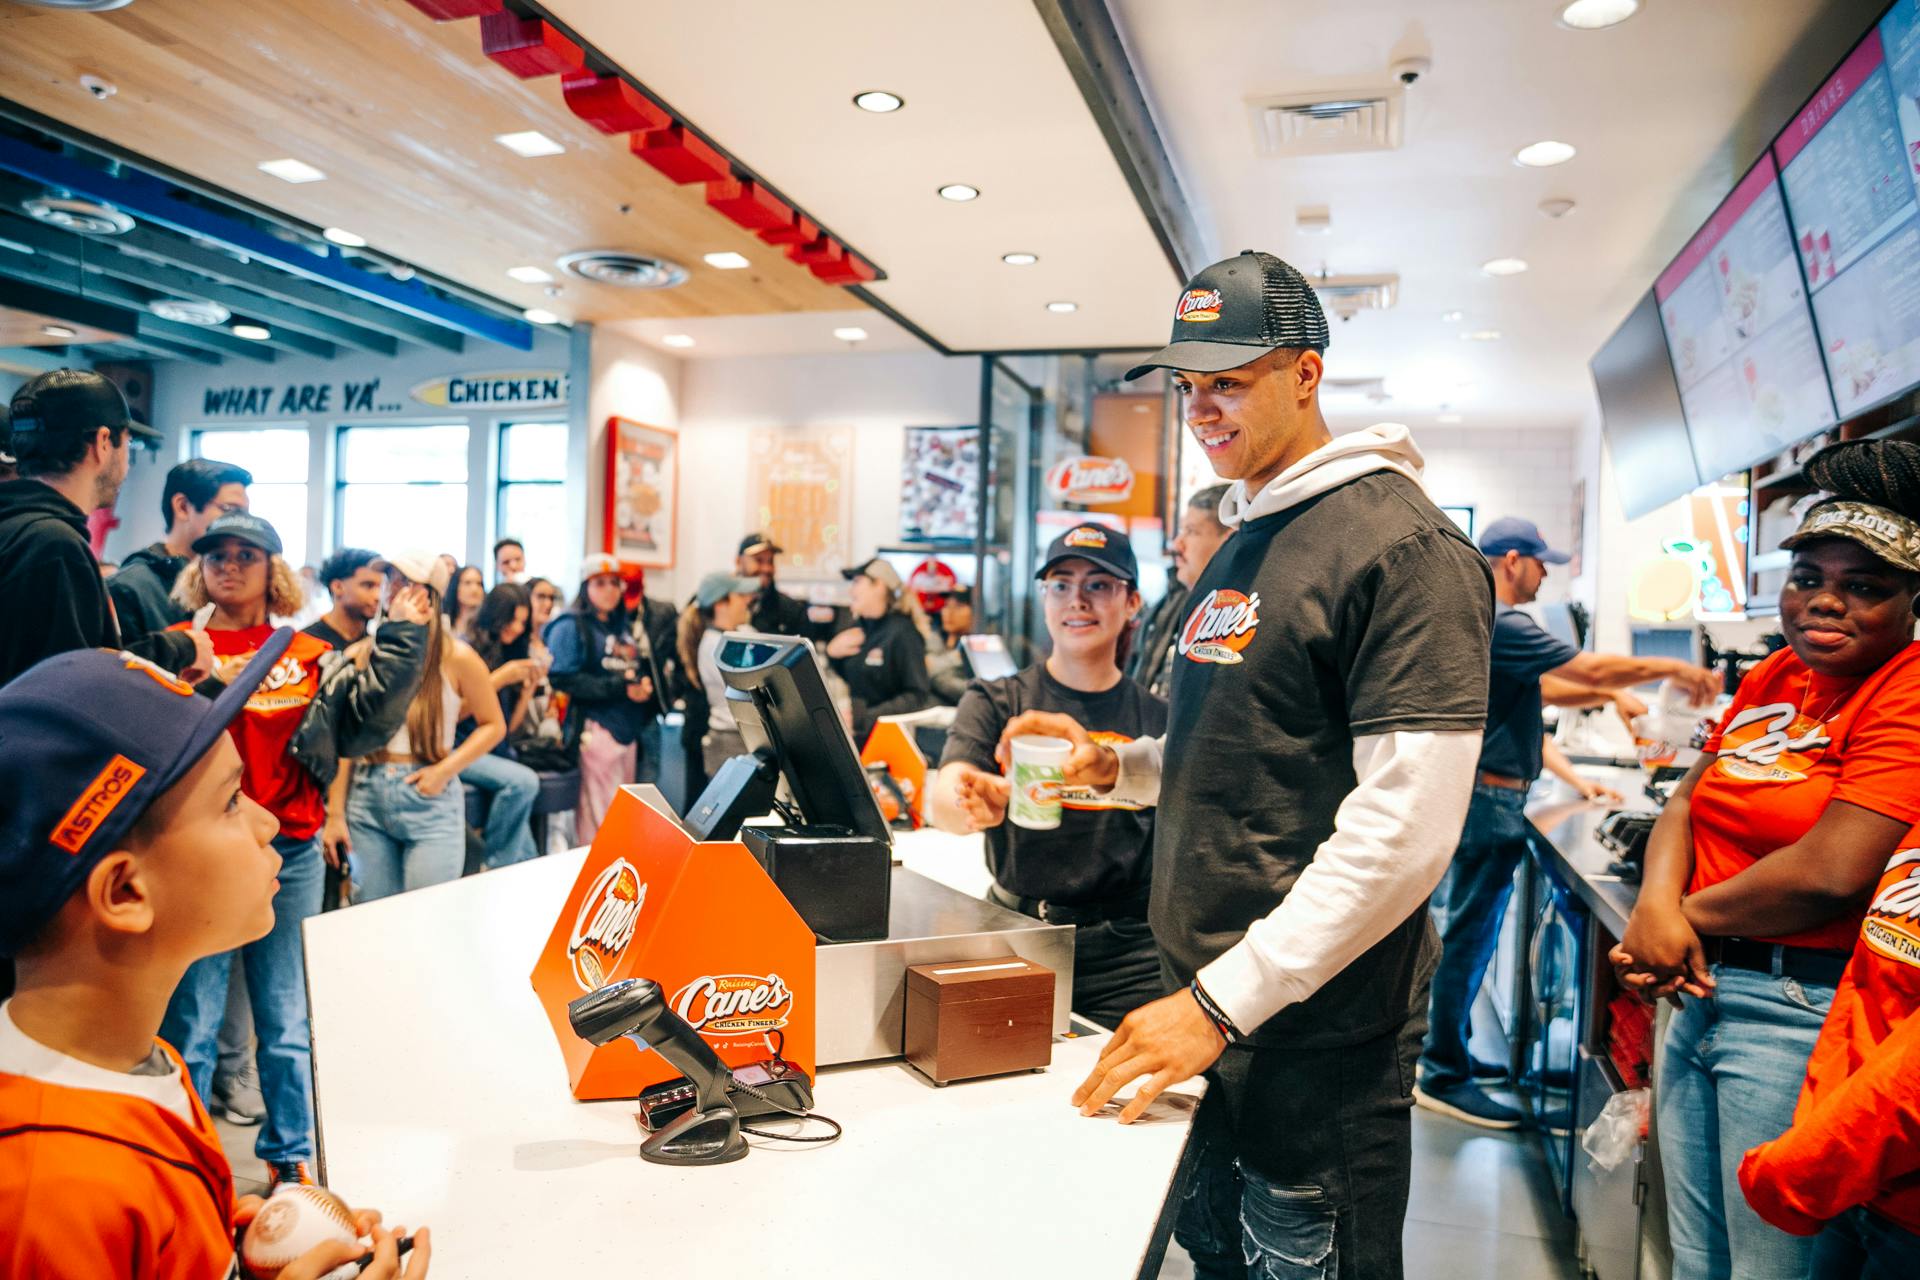 Jeremy Pena working the cash register at Raising Cane's